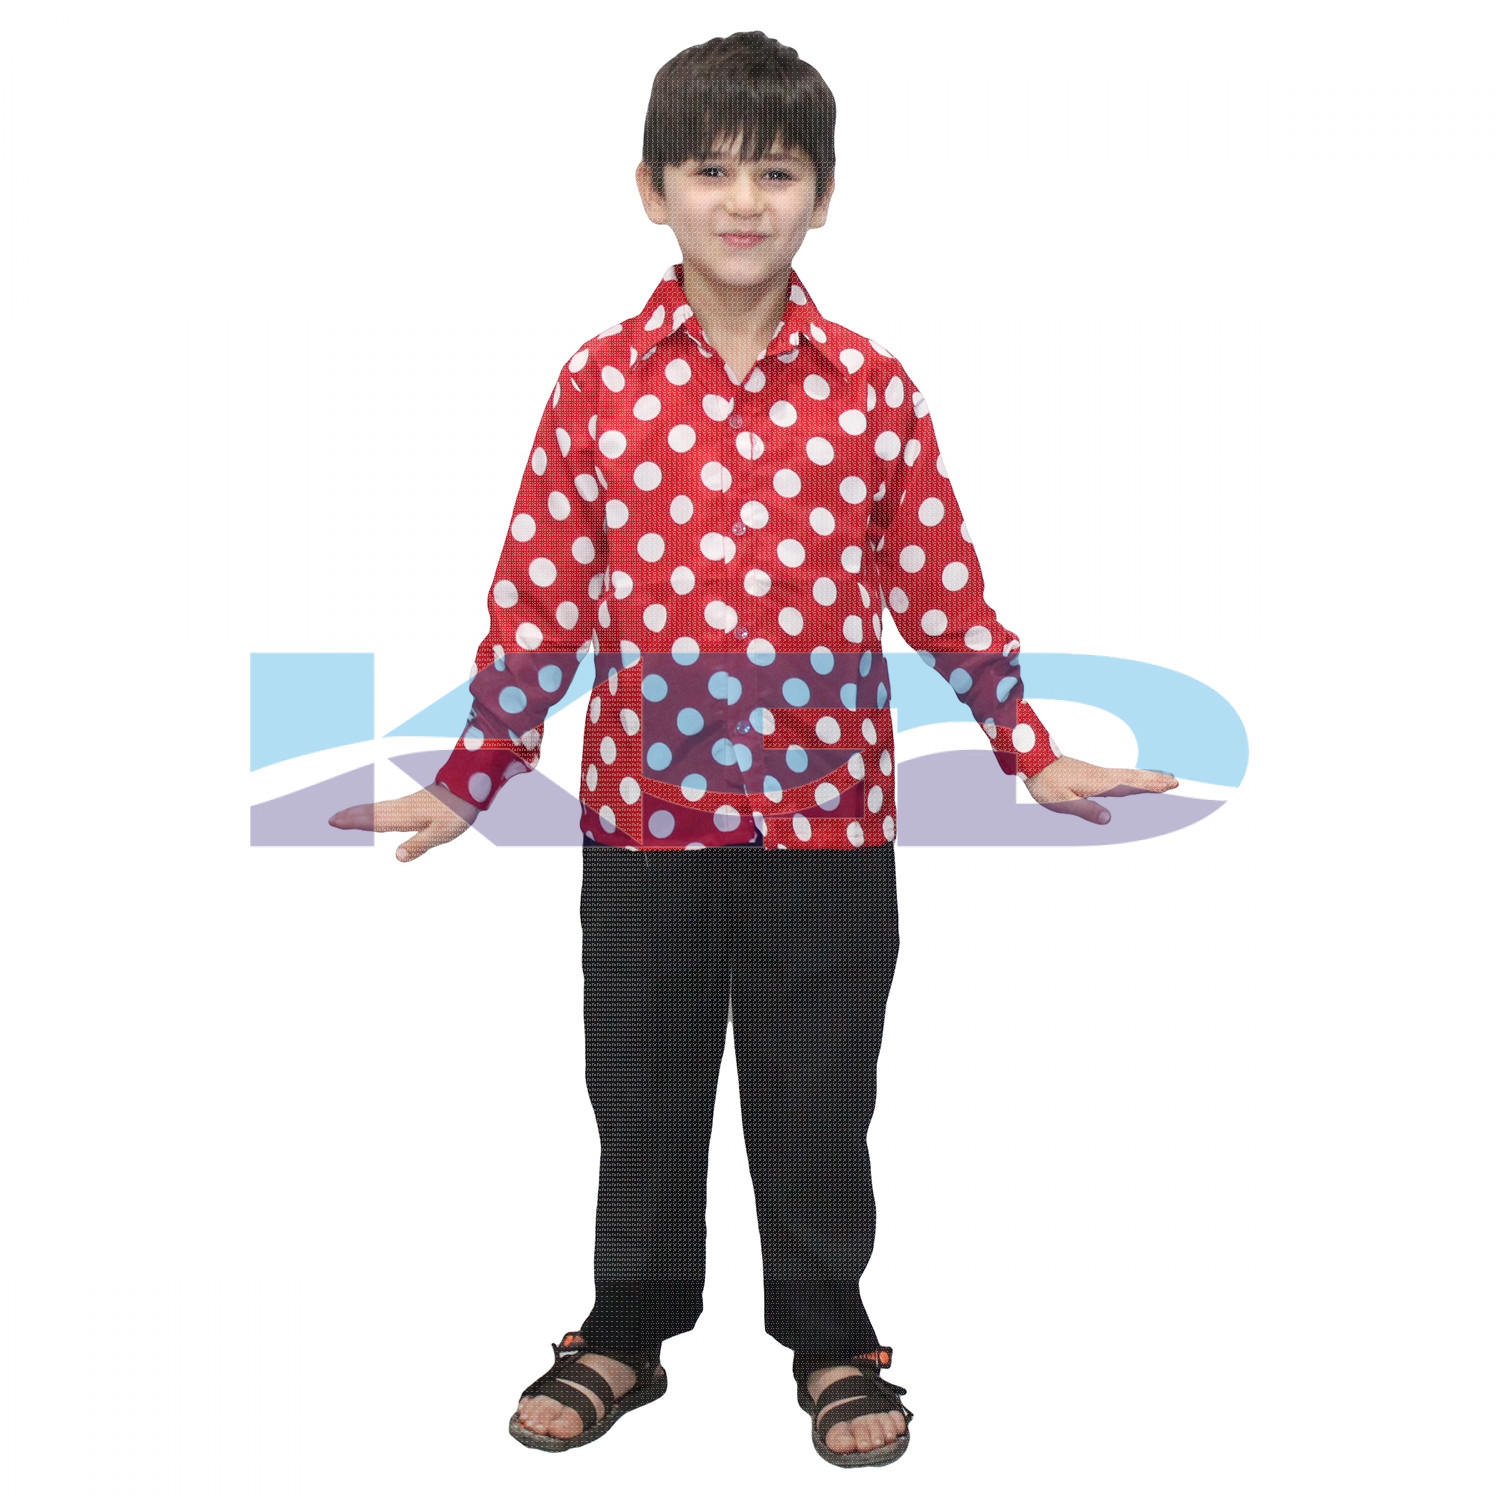 Polka Dot Shirt fancy dress for kids,Western Costume for Annual function/Theme Party/Competition/Stage Shows/Birthday Party Dress